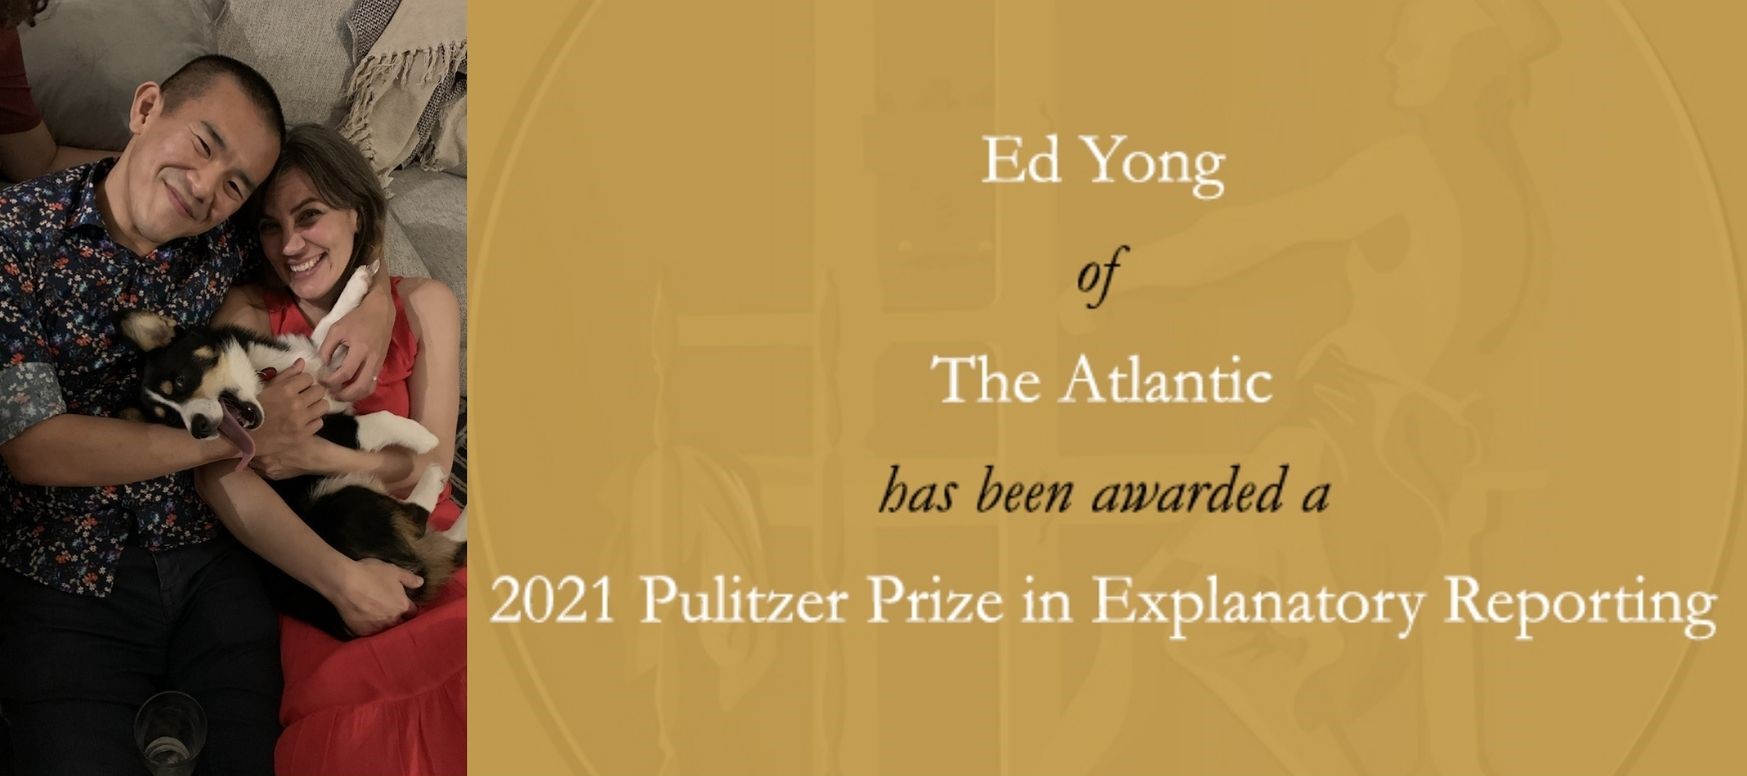 Ed Yong, a science writer with The Atlantic, has been awarded with the 2021 Pulitzer Prize in Explanatory Reporting on June 12.